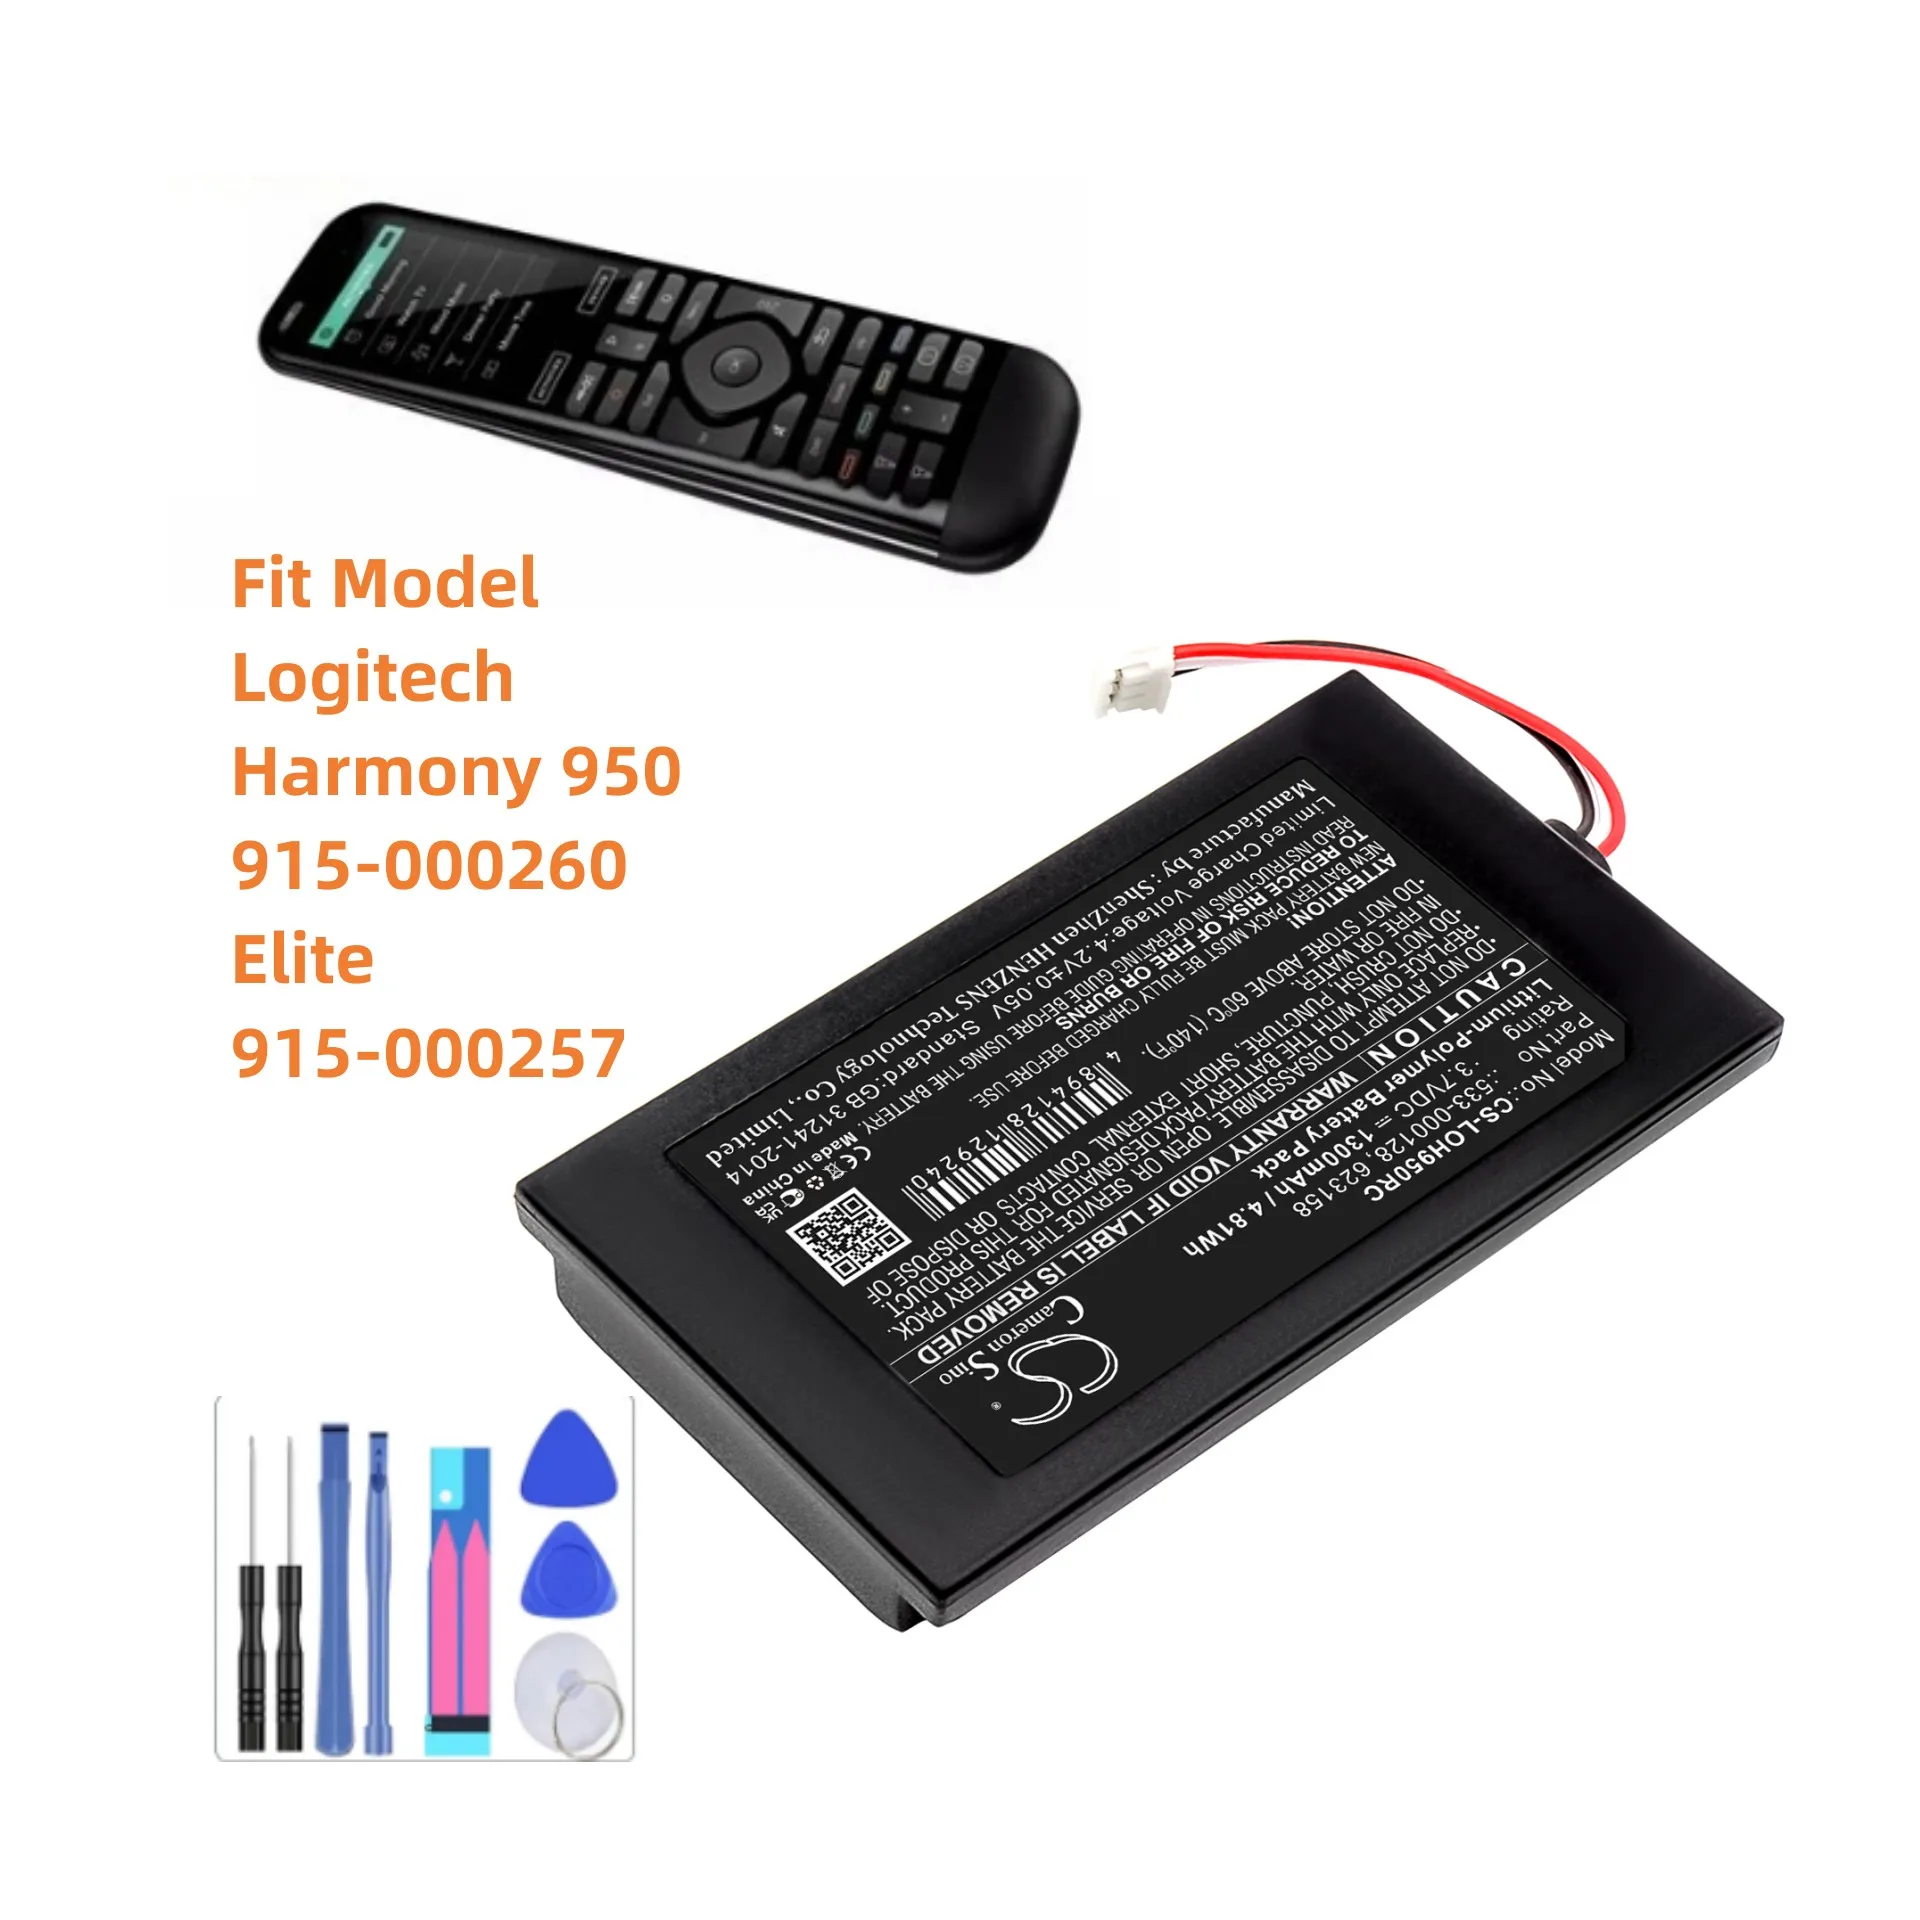 

Remote Control Battery For Logitech Harmony 950 915-000260 Elite 15-000257 533-000128 623158 1300mAh / 4.81Wh